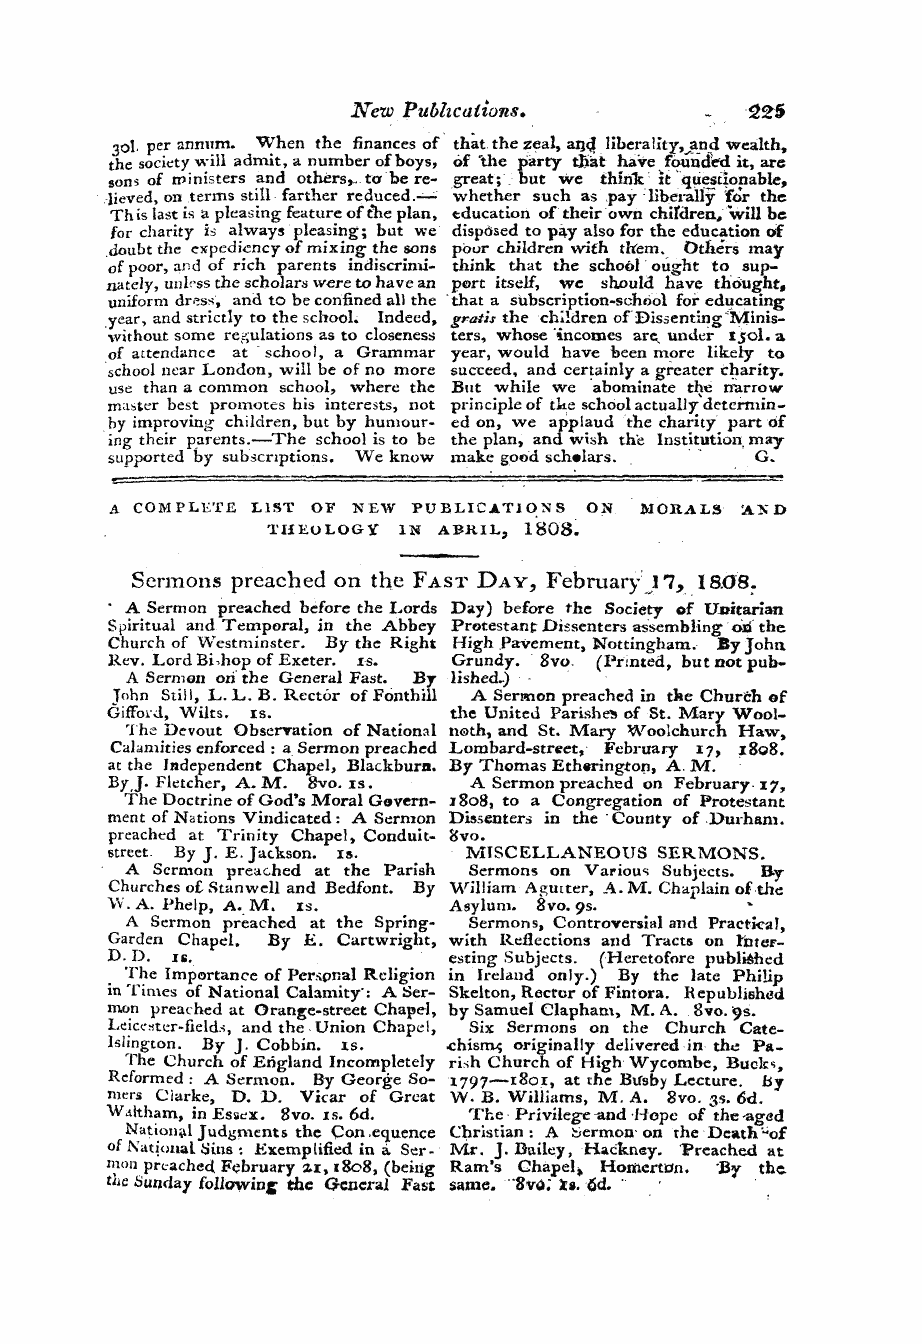 Monthly Repository (1806-1838) and Unitarian Chronicle (1832-1833): F Y, 1st edition: 53